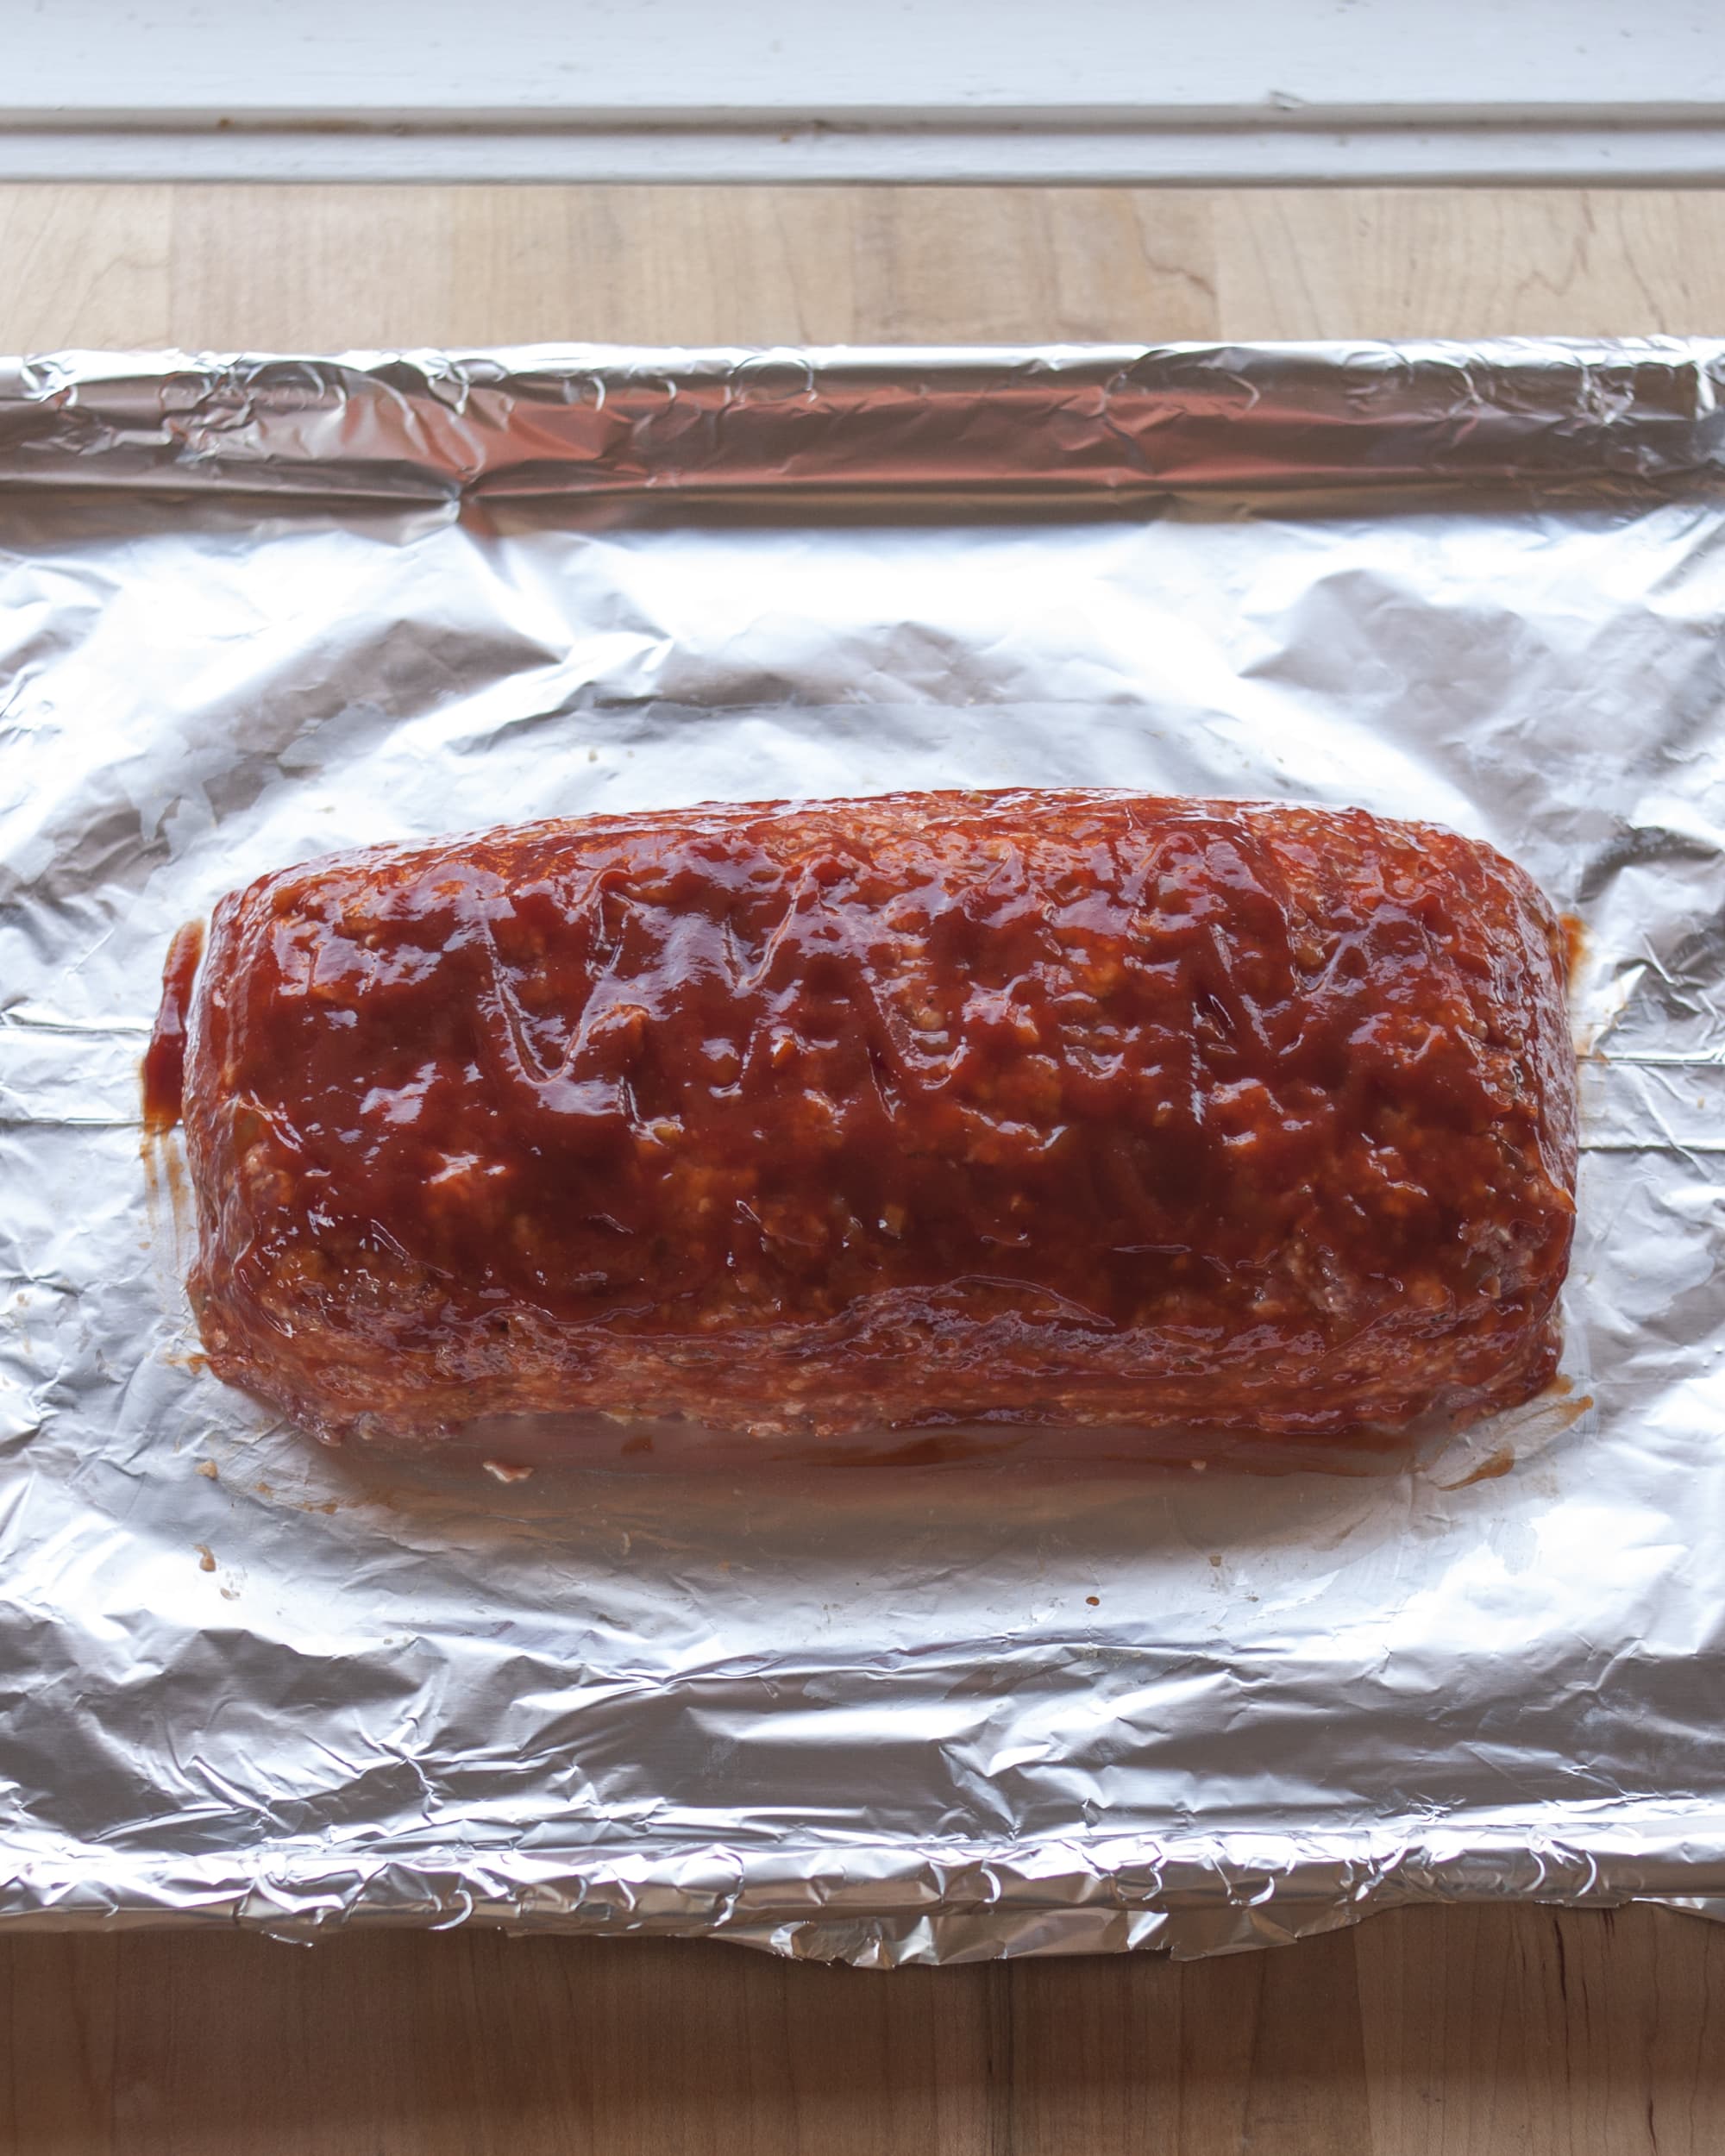 How long do i cook meatloaf and at what temperature How Long To Cook Meatloaf And More Tips For Cooking